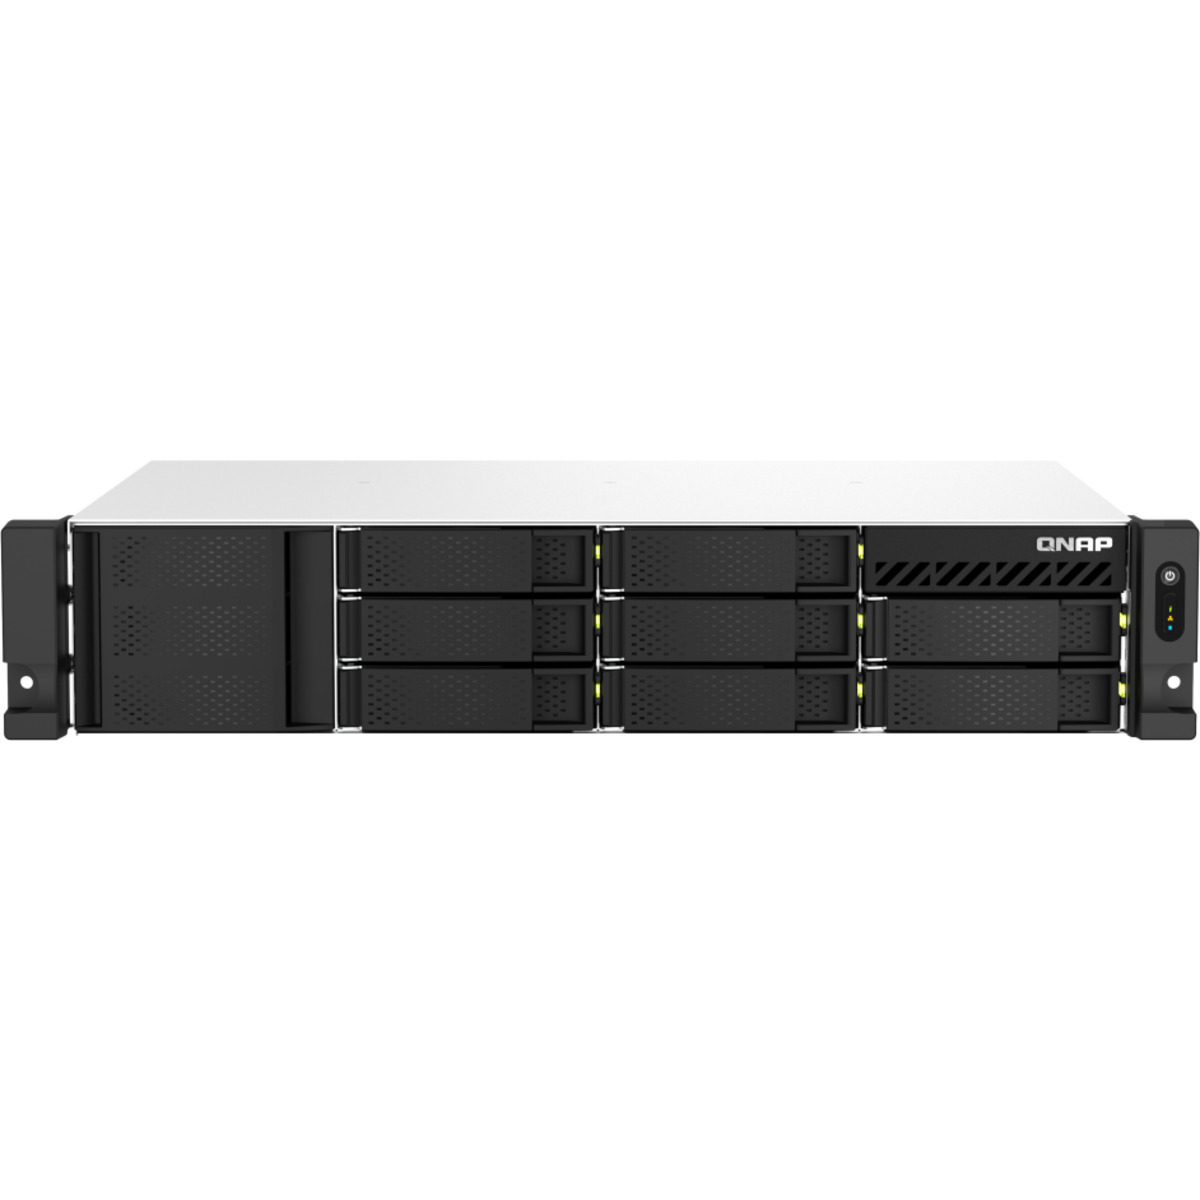 QNAP TS-873AeU-RP 32tb 8-Bay RackMount Multimedia / Power User / Business NAS - Network Attached Storage Device 4x8tb Toshiba Enterprise Capacity MG08ADA800E 3.5 7200rpm SATA 6Gb/s HDD ENTERPRISE Class Drives Installed - Burn-In Tested - FREE RAM UPGRADE TS-873AeU-RP